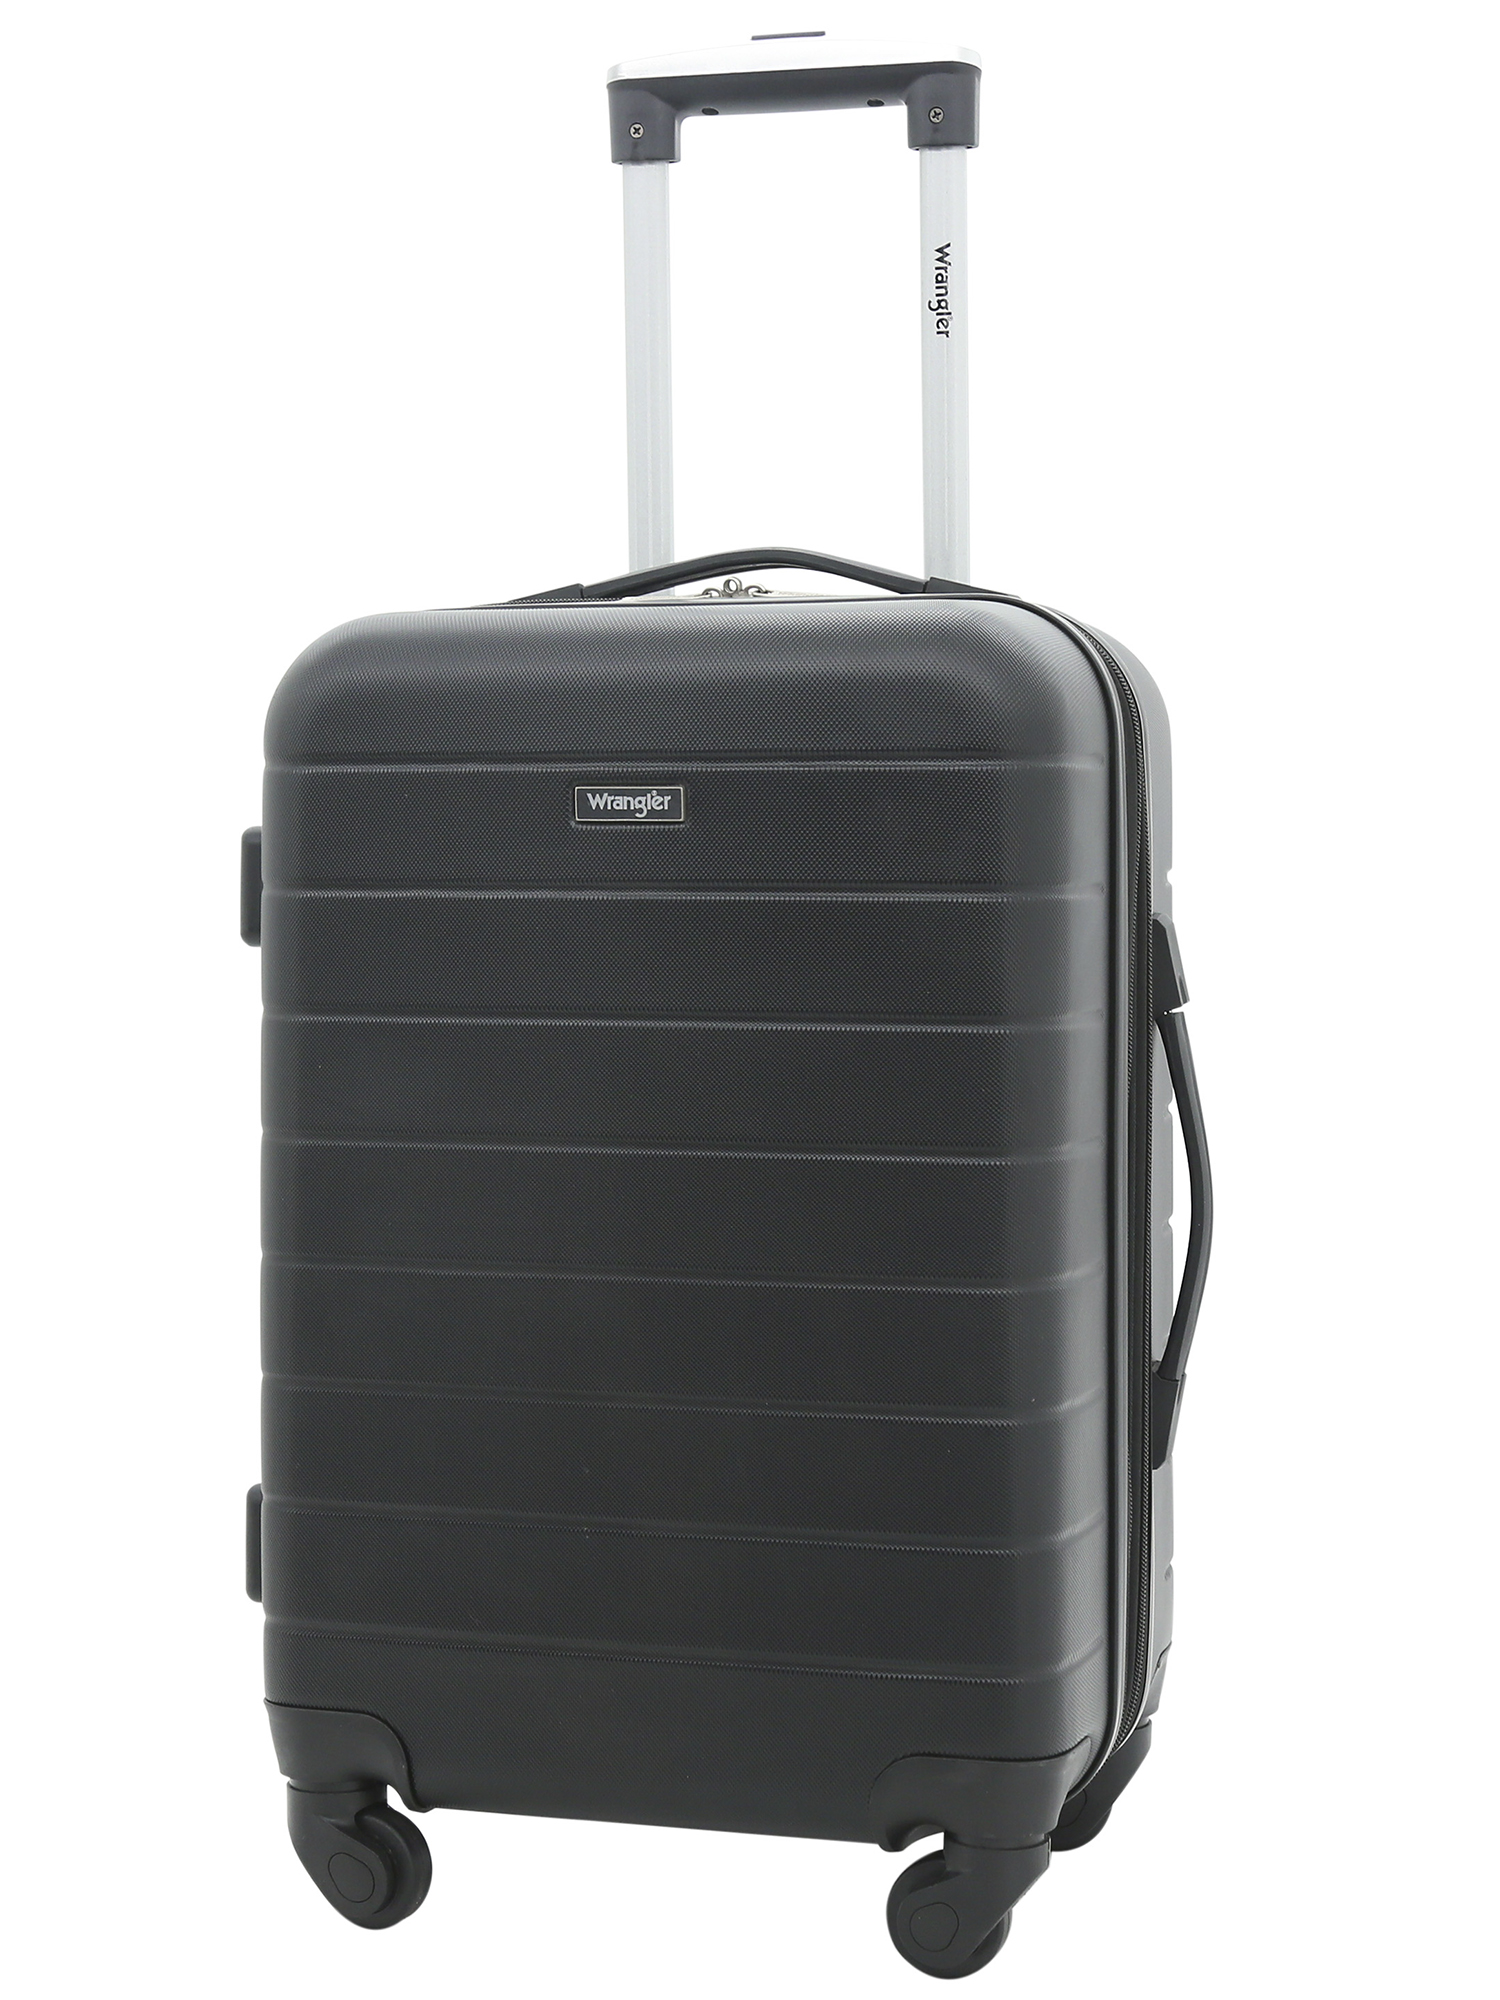 Wrangler 2pc Expandable Rolling Carry-on Set, Black - image 4 of 14